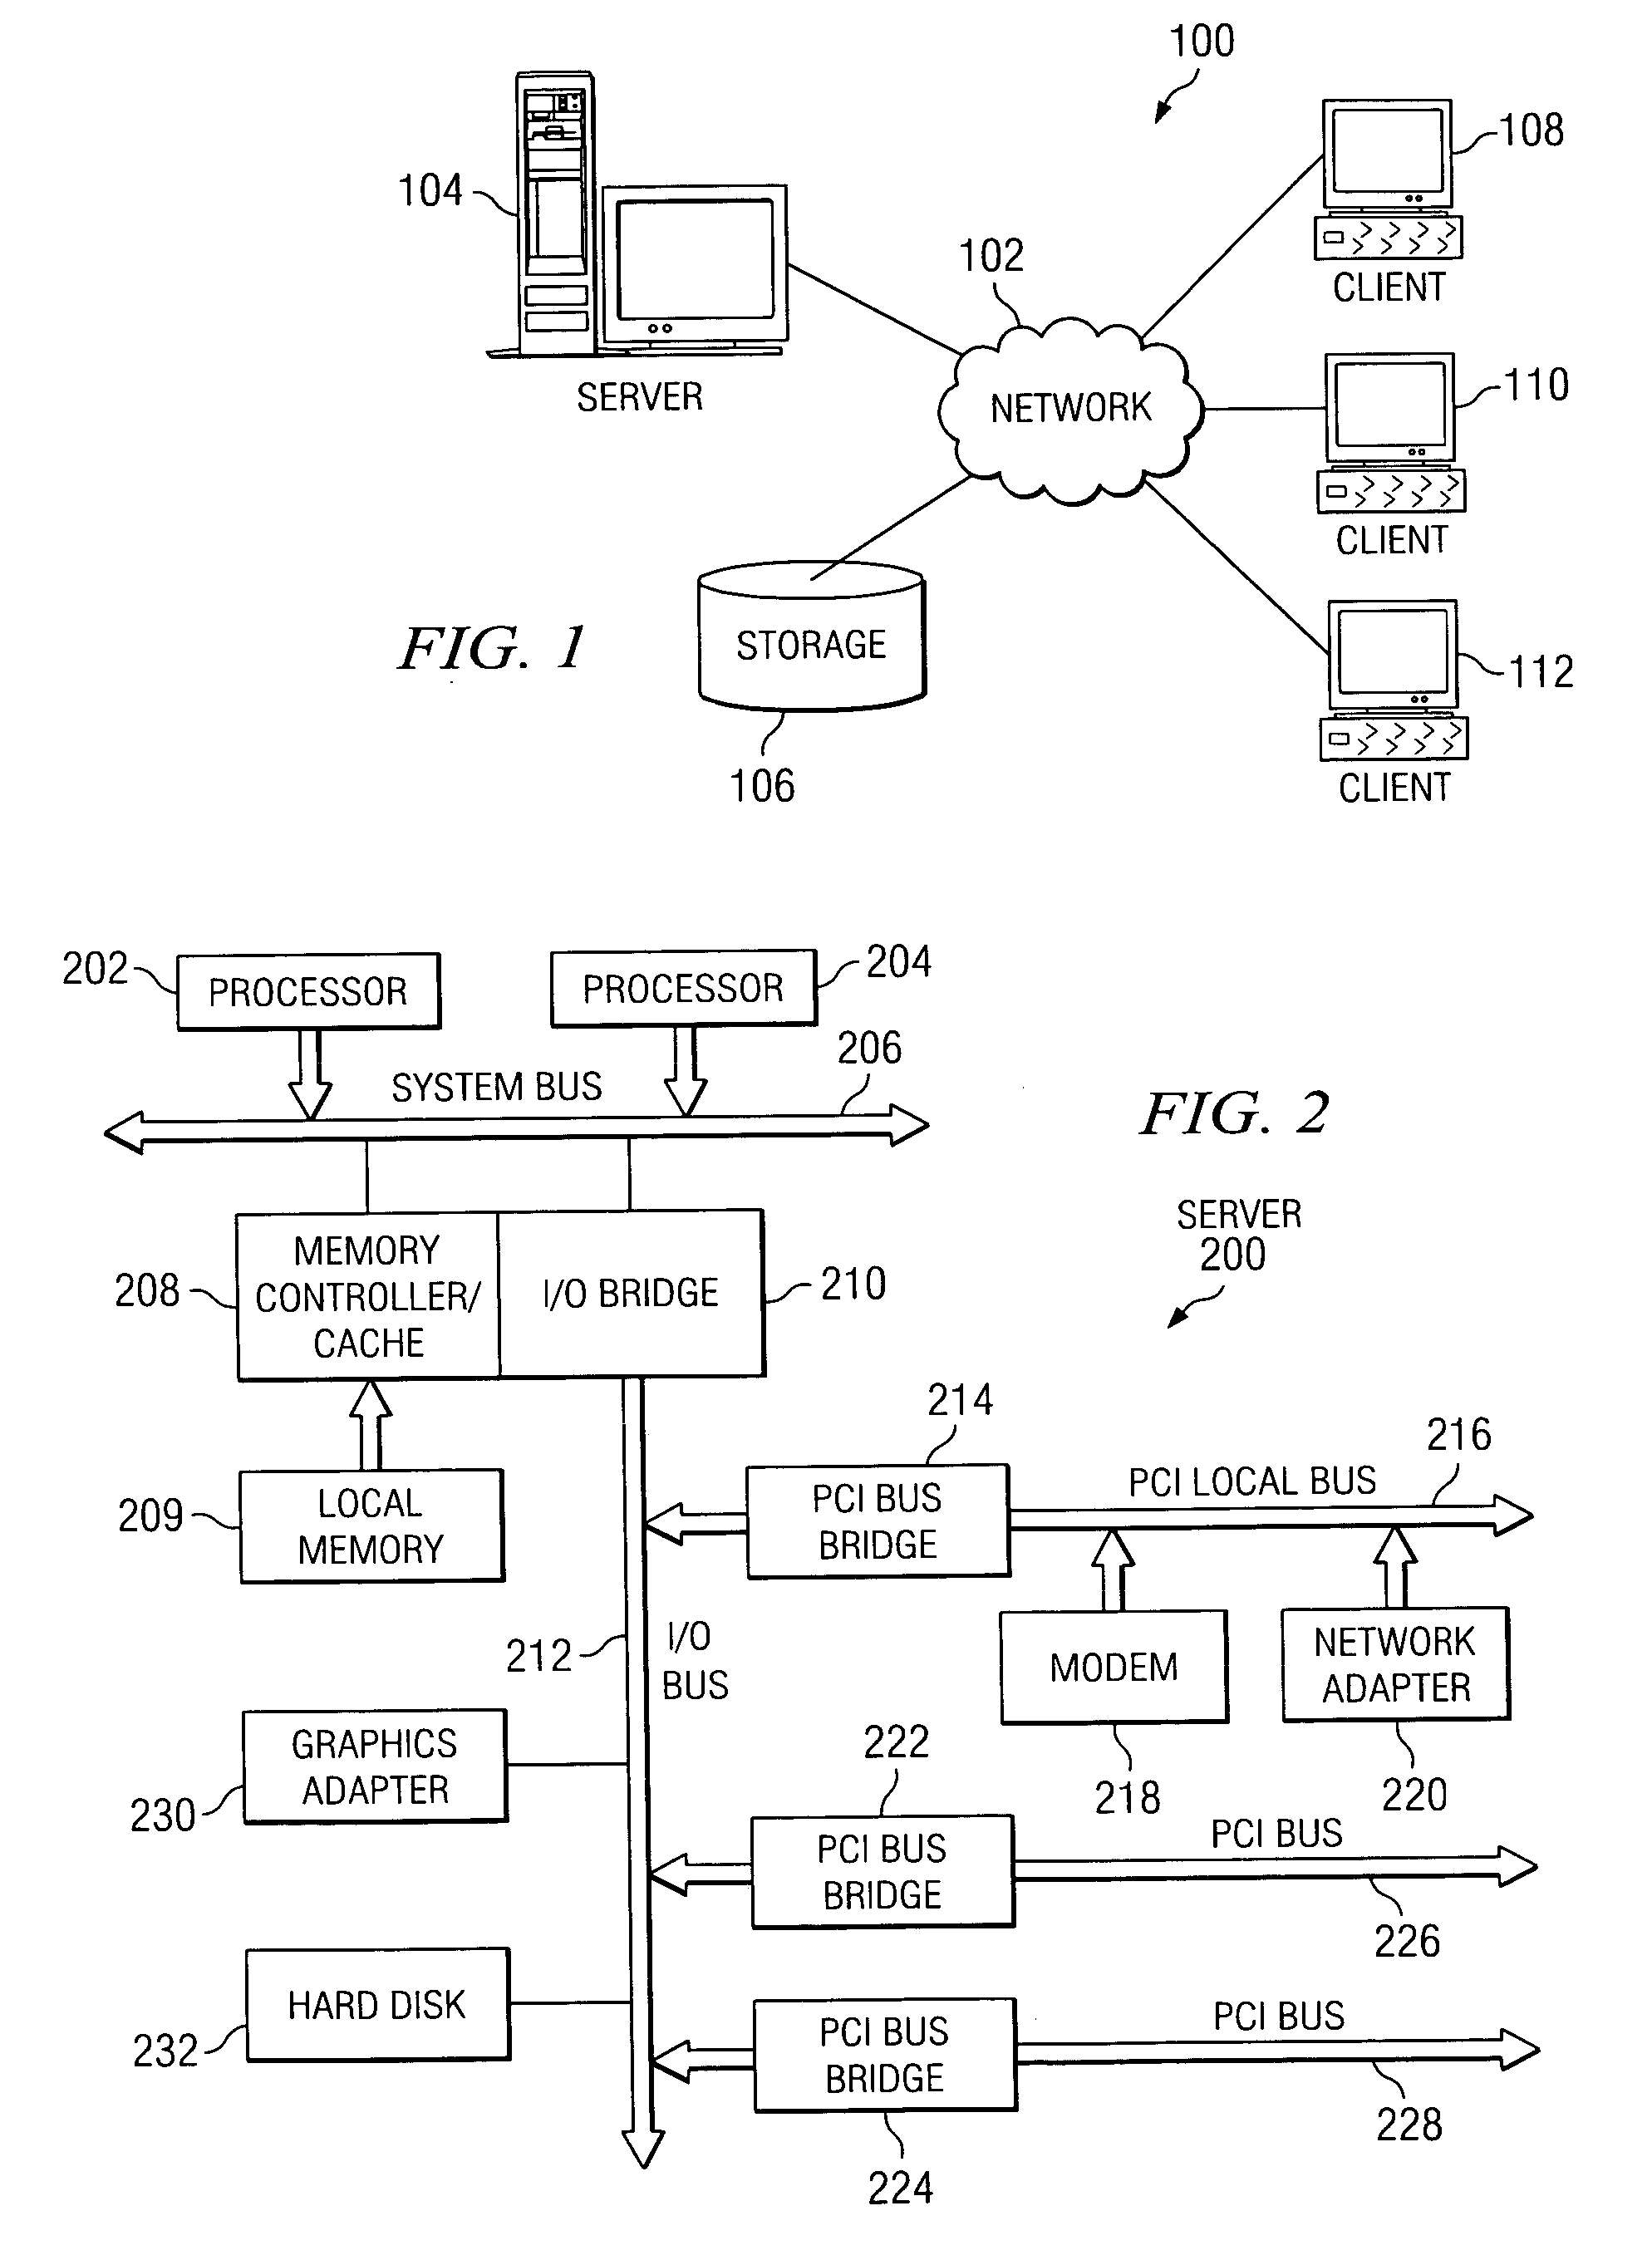 Method and system for automatic detection, inventory, and operating system deployment on network boot capable computers